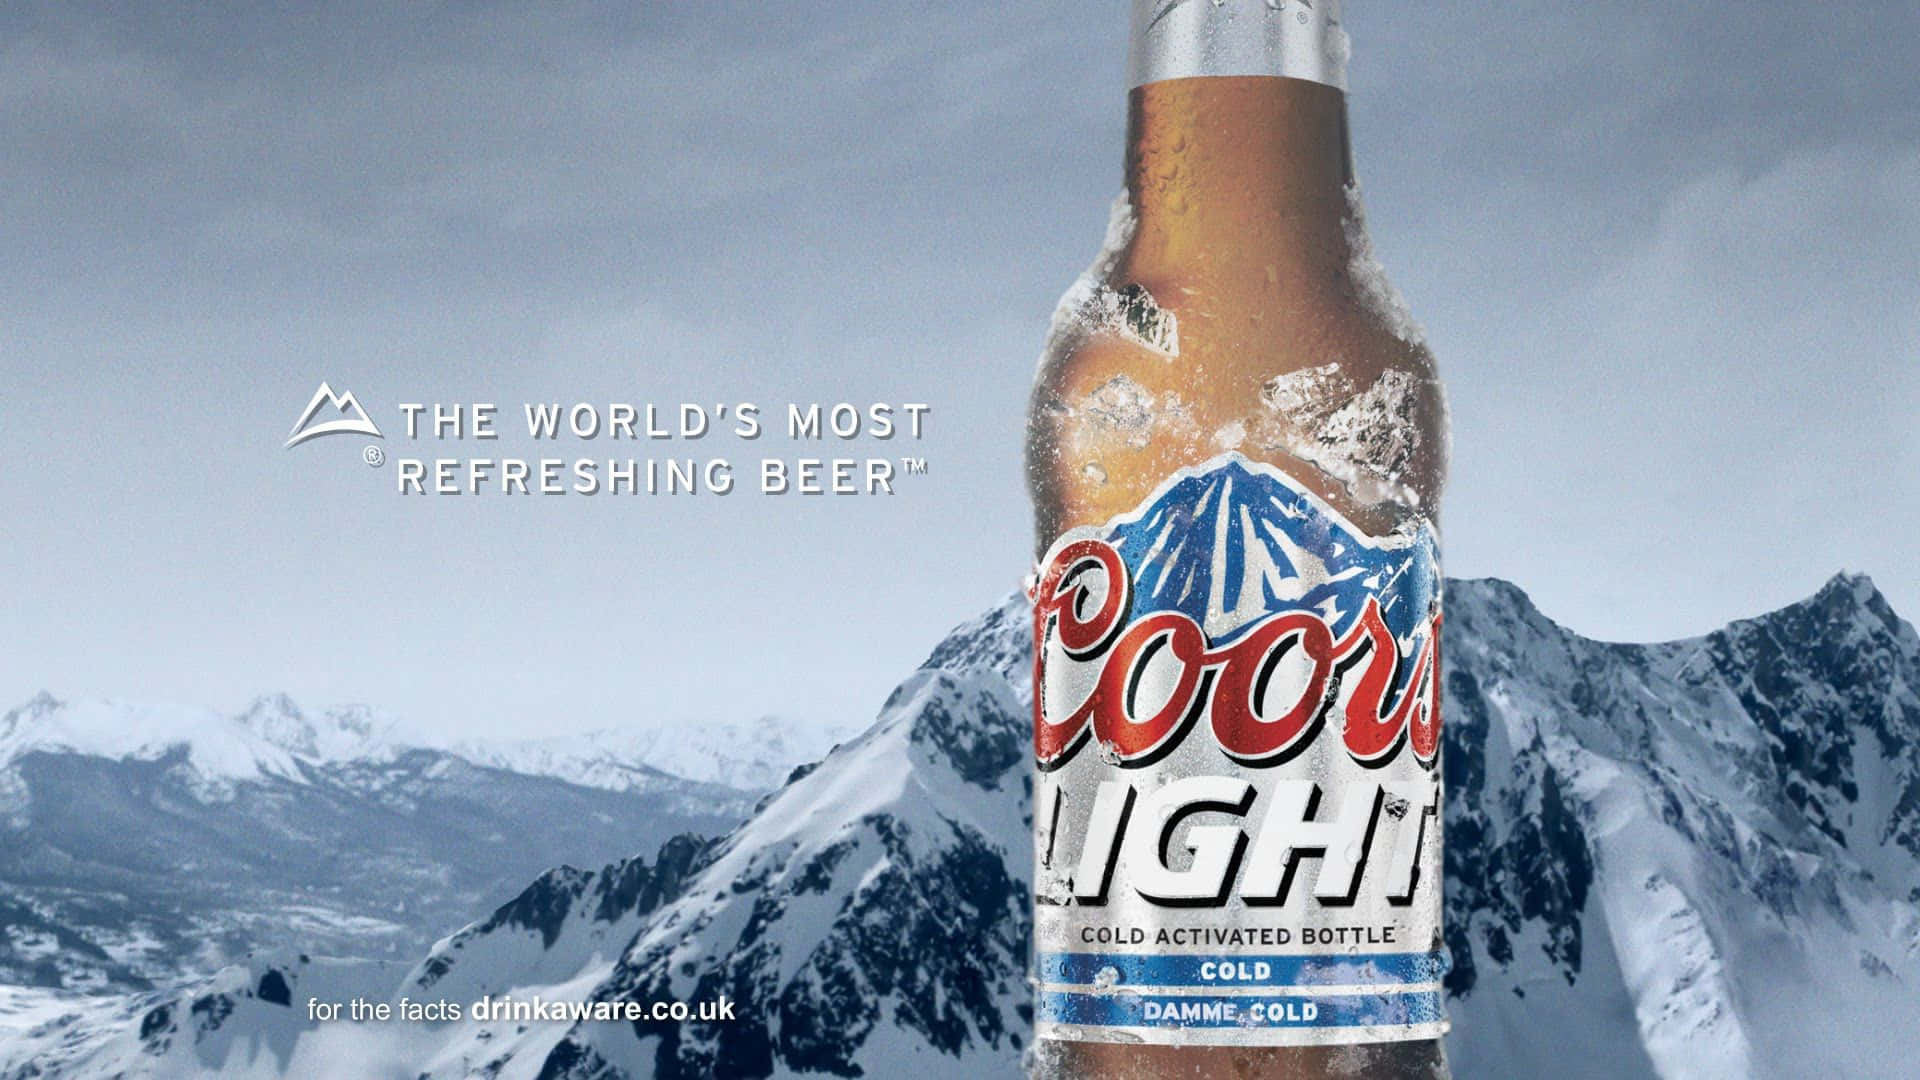 Experience The Refreshing Taste Of Coors Light Wallpaper